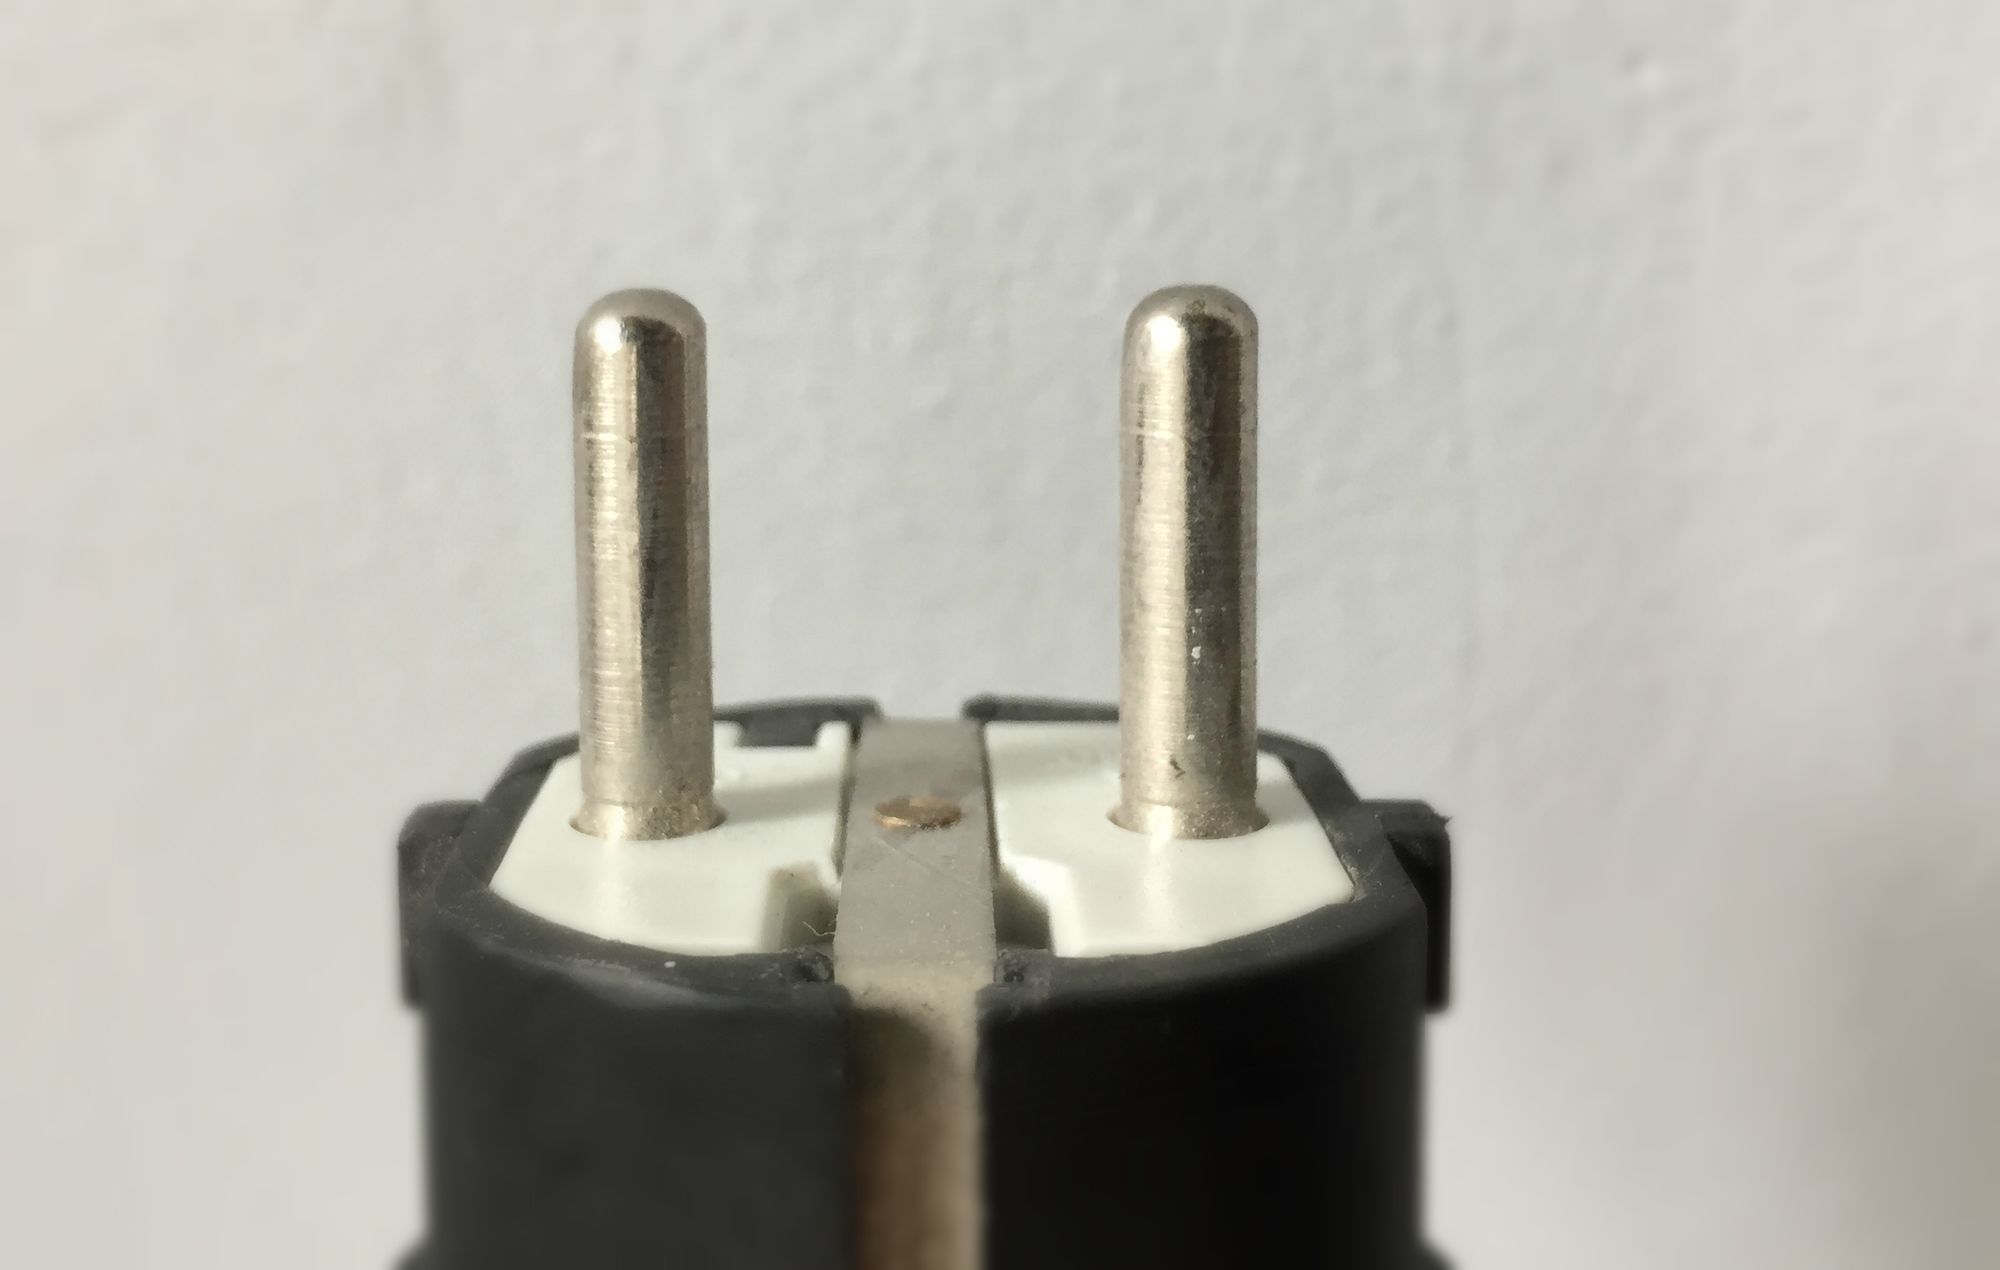 What power plugs are used in Vietnam?